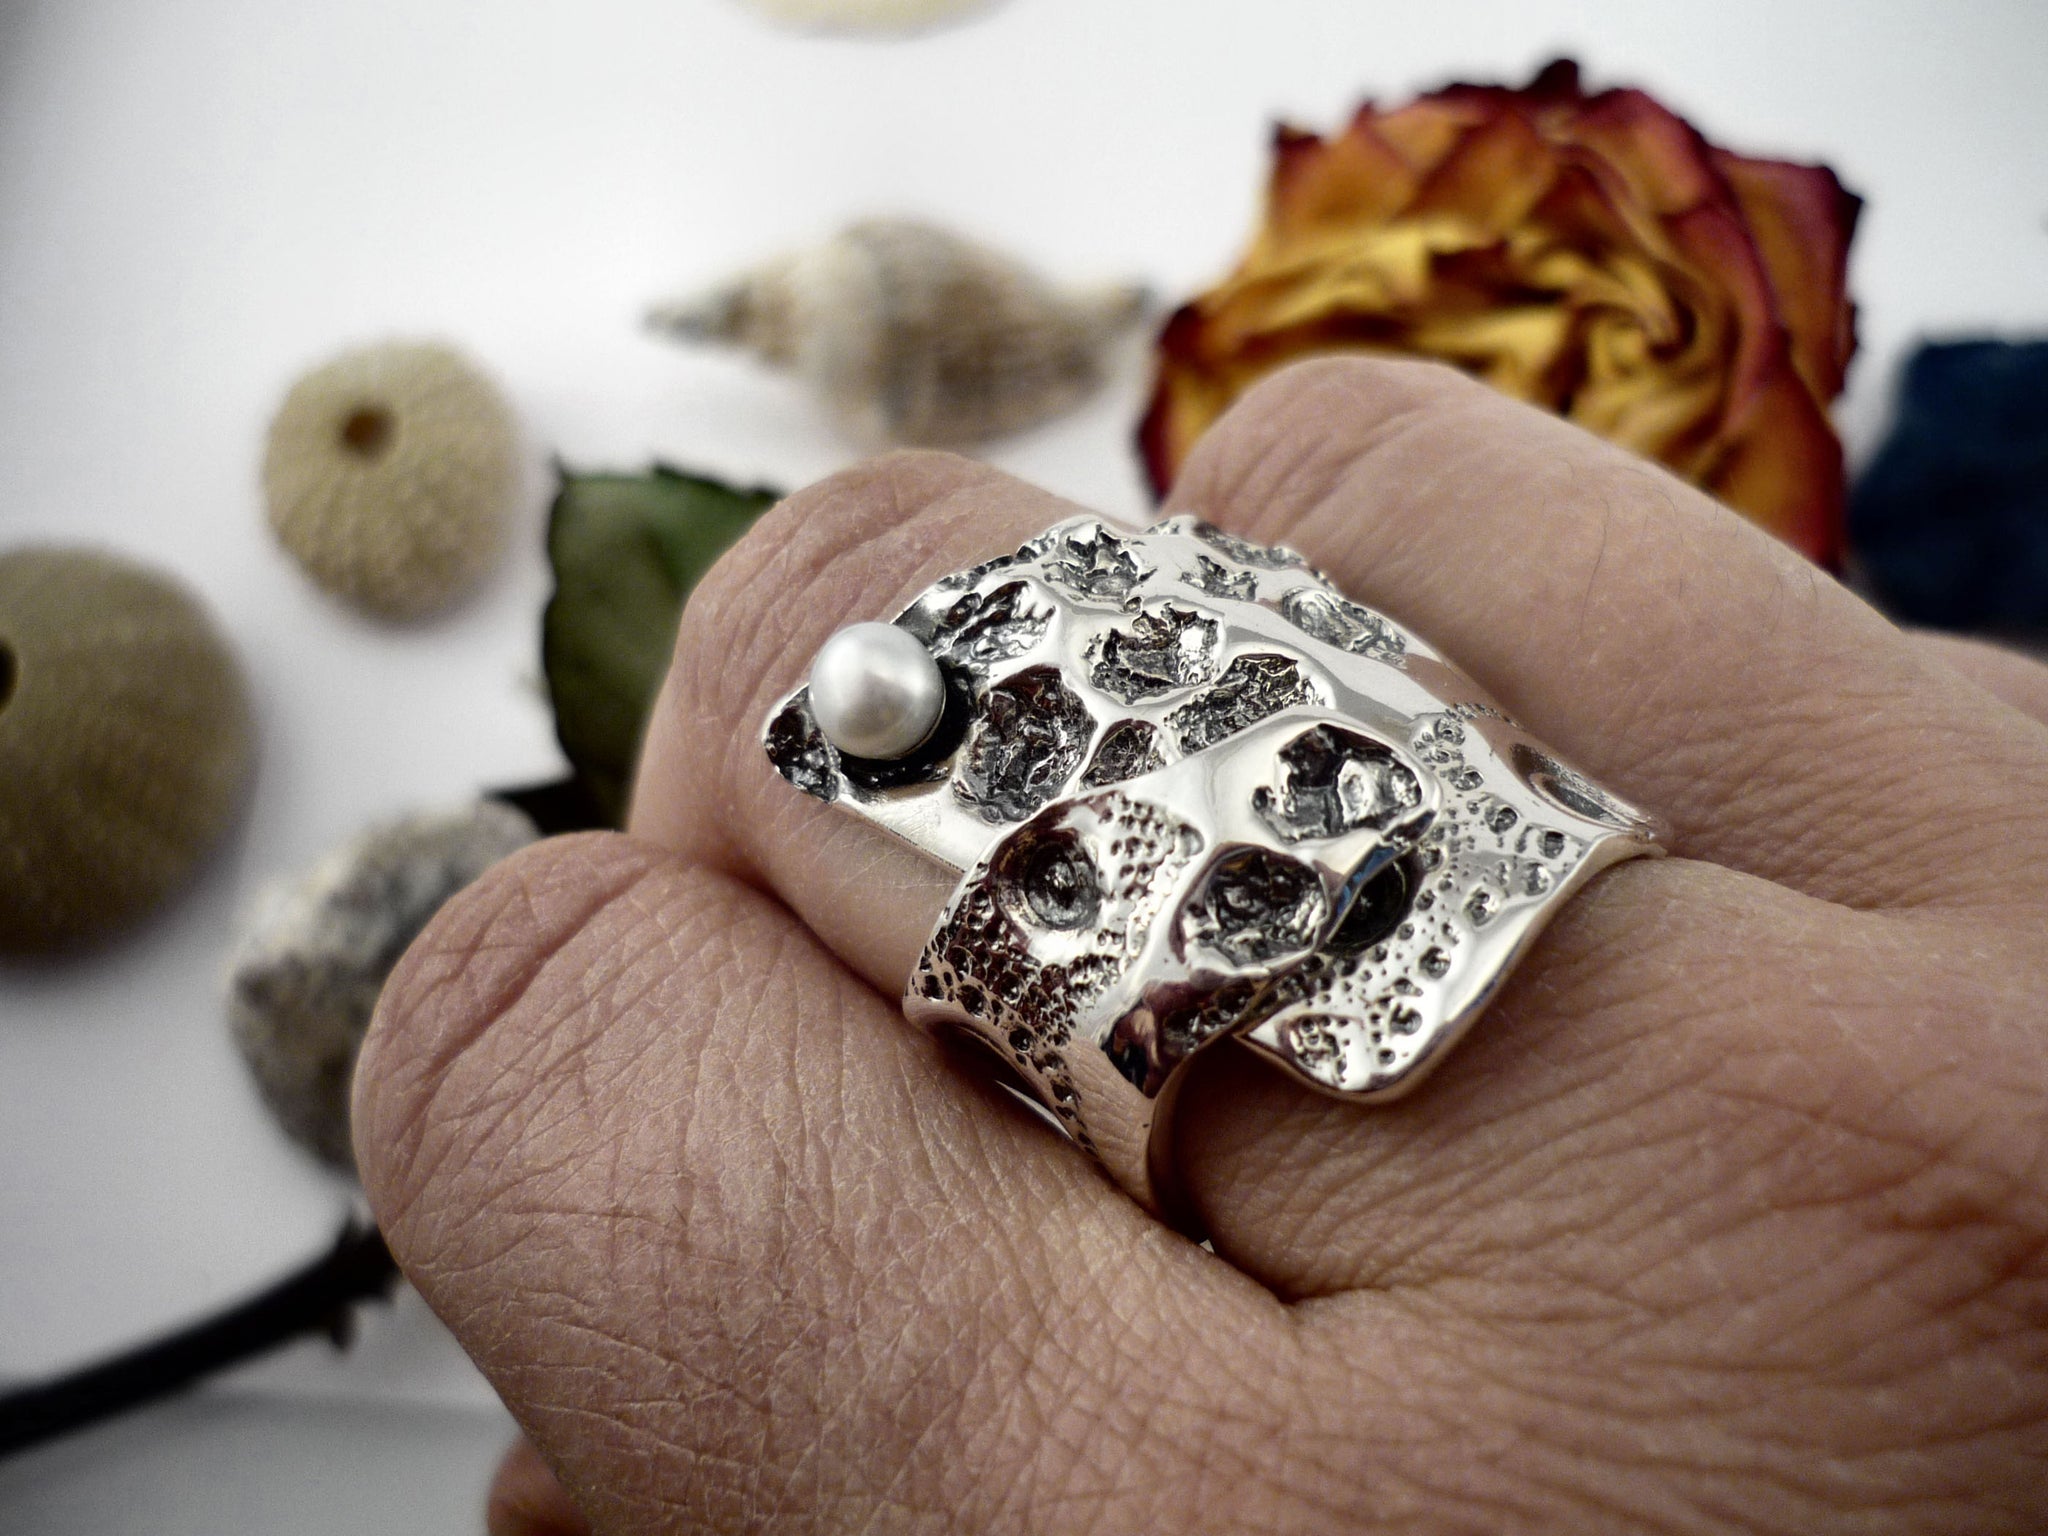 PEPPERY SWEETNESS, unique ring with a texture of peppercorns and sea urchin shell